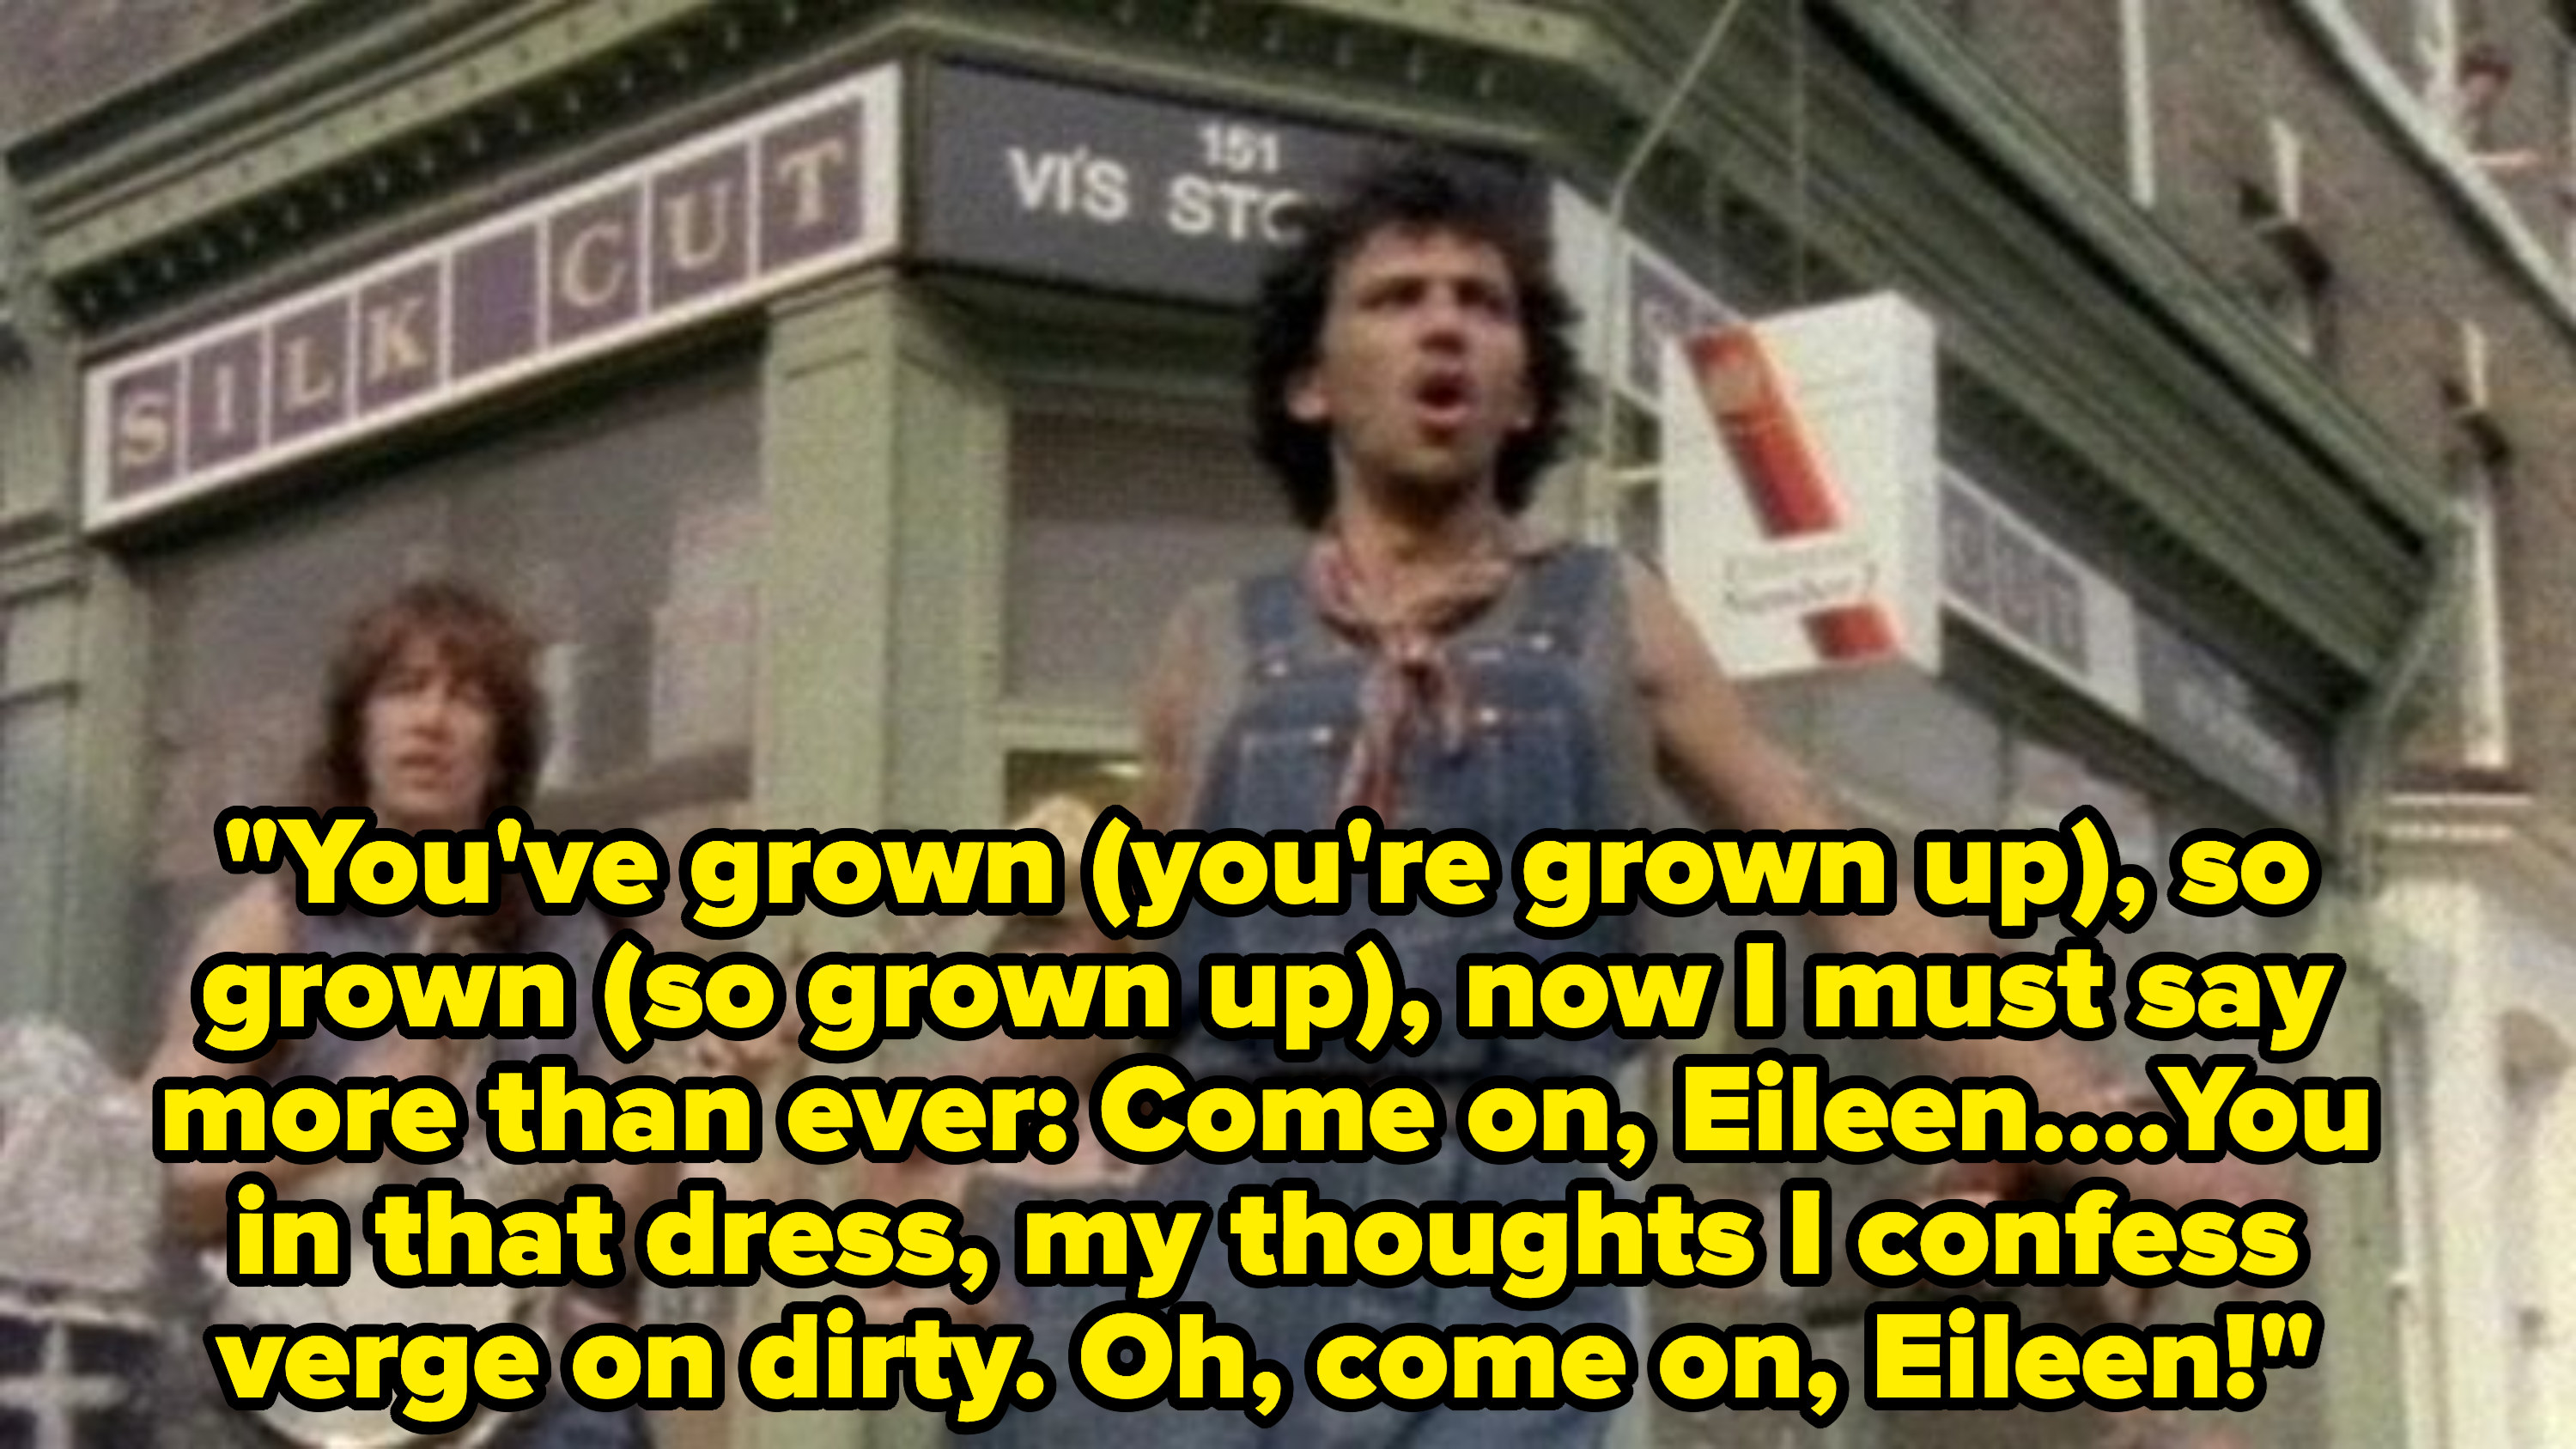 Dexys Midnight Runners singing: &quot;You in that dress, my thoughts I confess, verge on dirty. Oh, come on, Eileen!&quot;